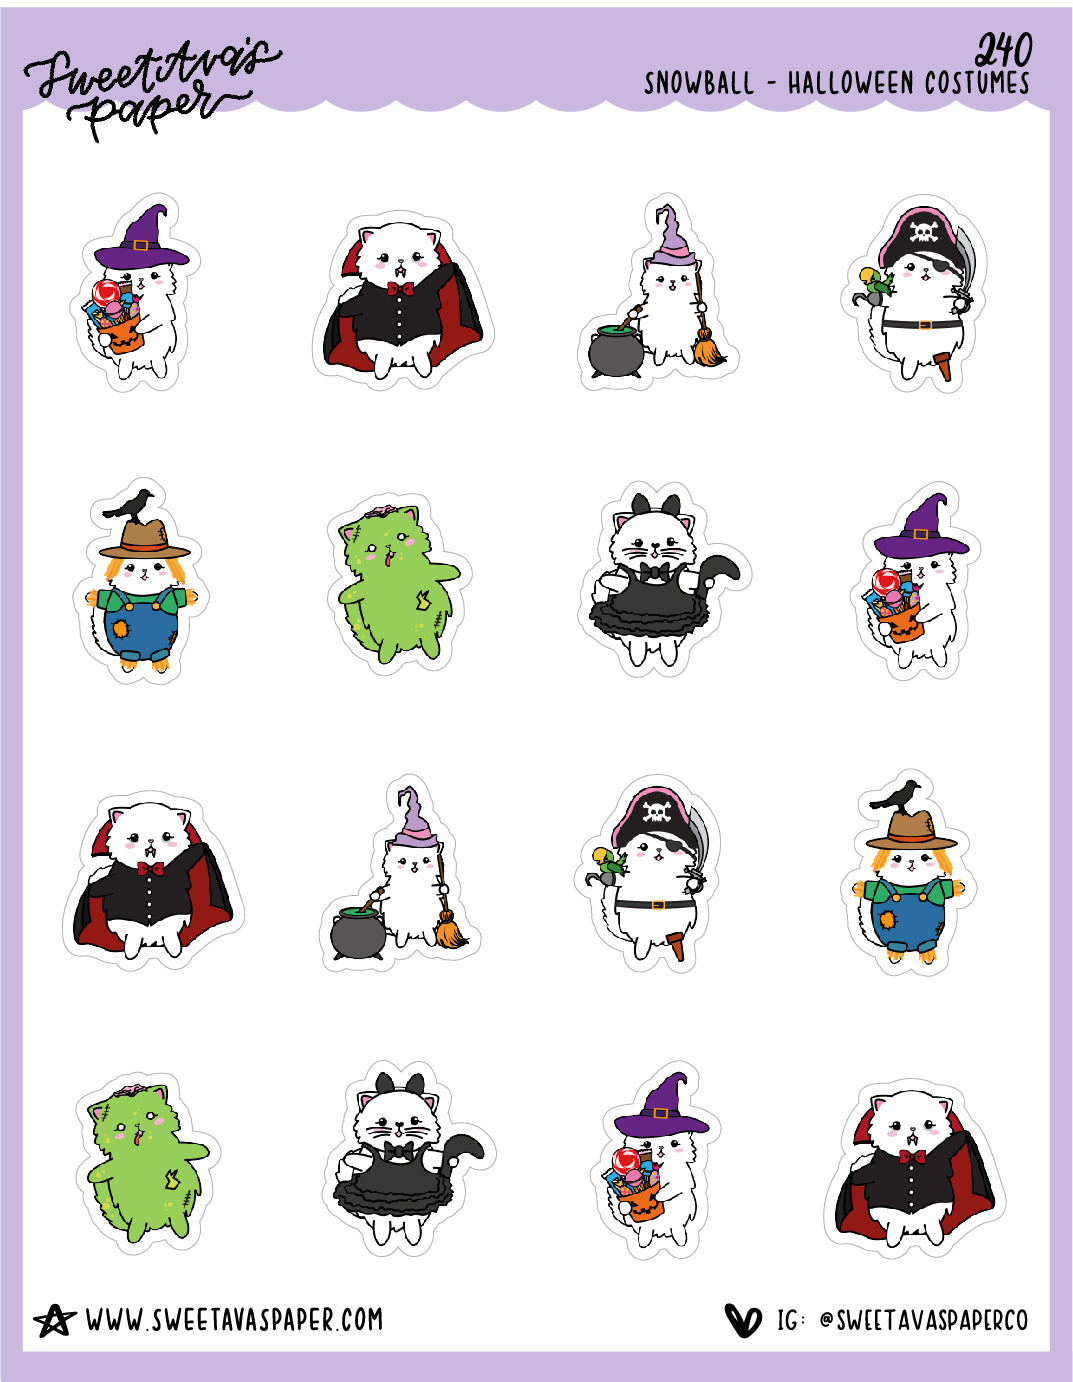 Halloween Costumes Stickers - Snowball The Cat - [240]